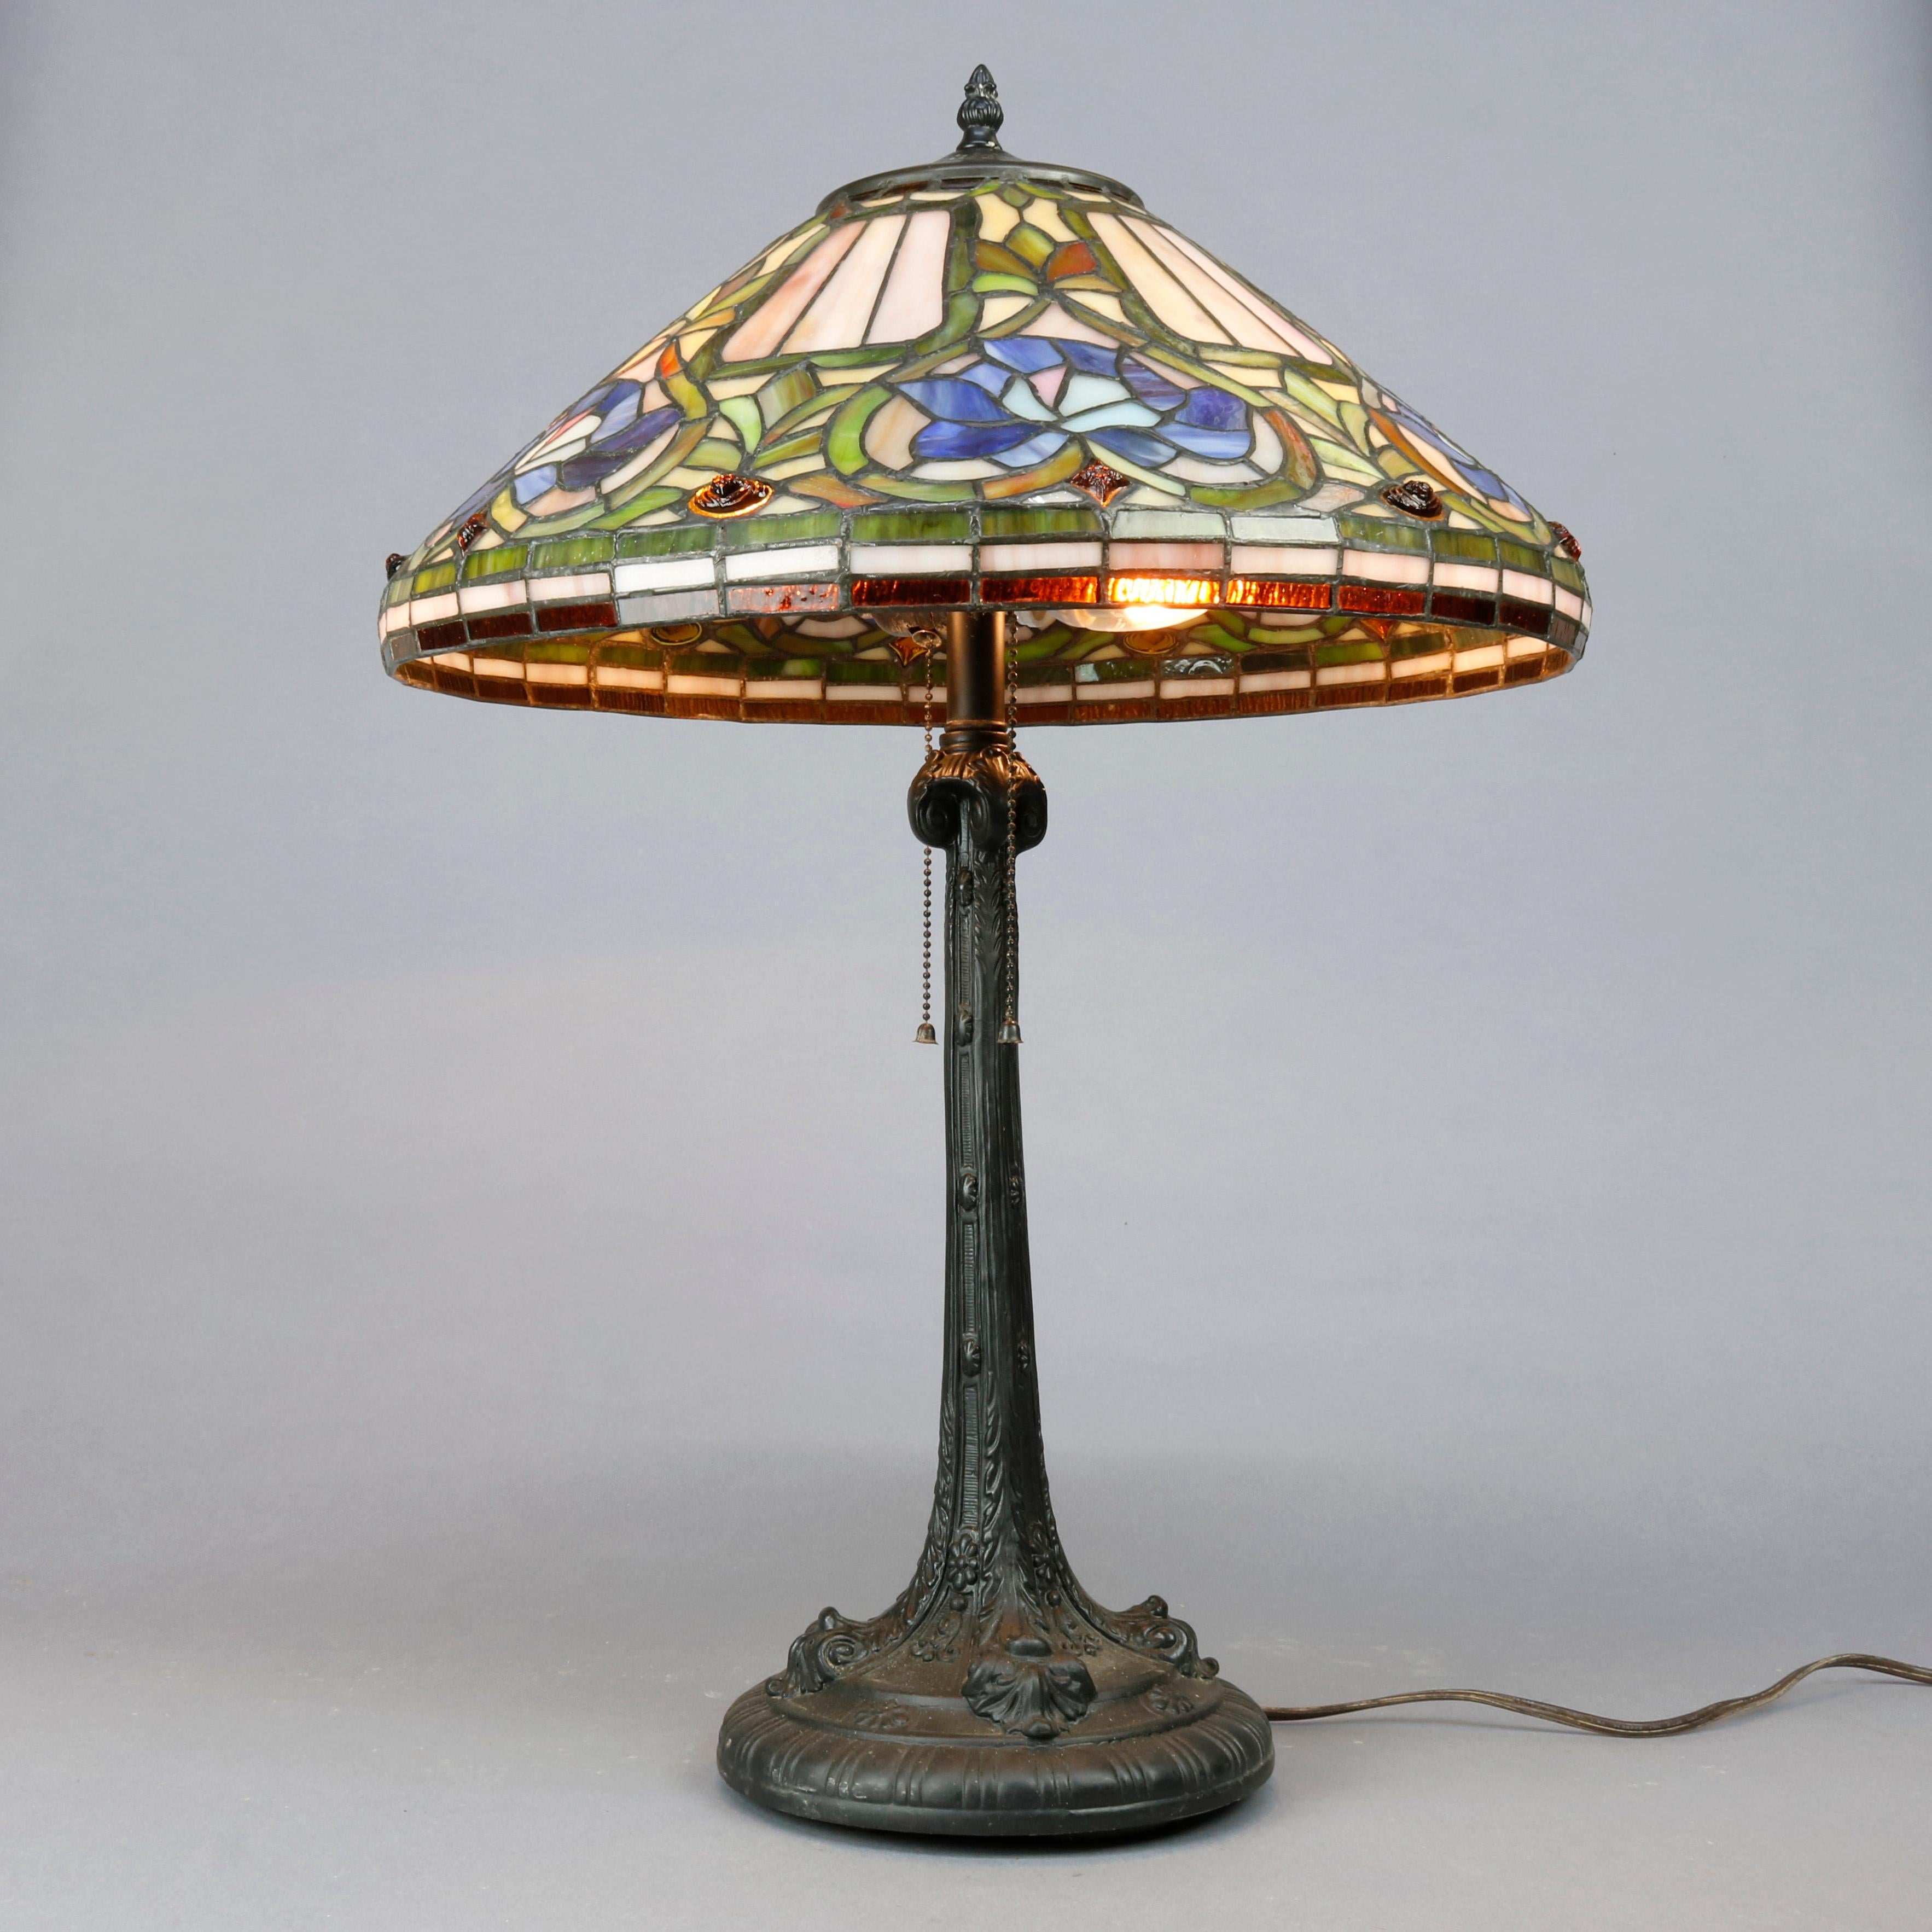 Cast Antique Arts & Crafts Stylized Floral Slag, Stained and Jewel Glass Lamp